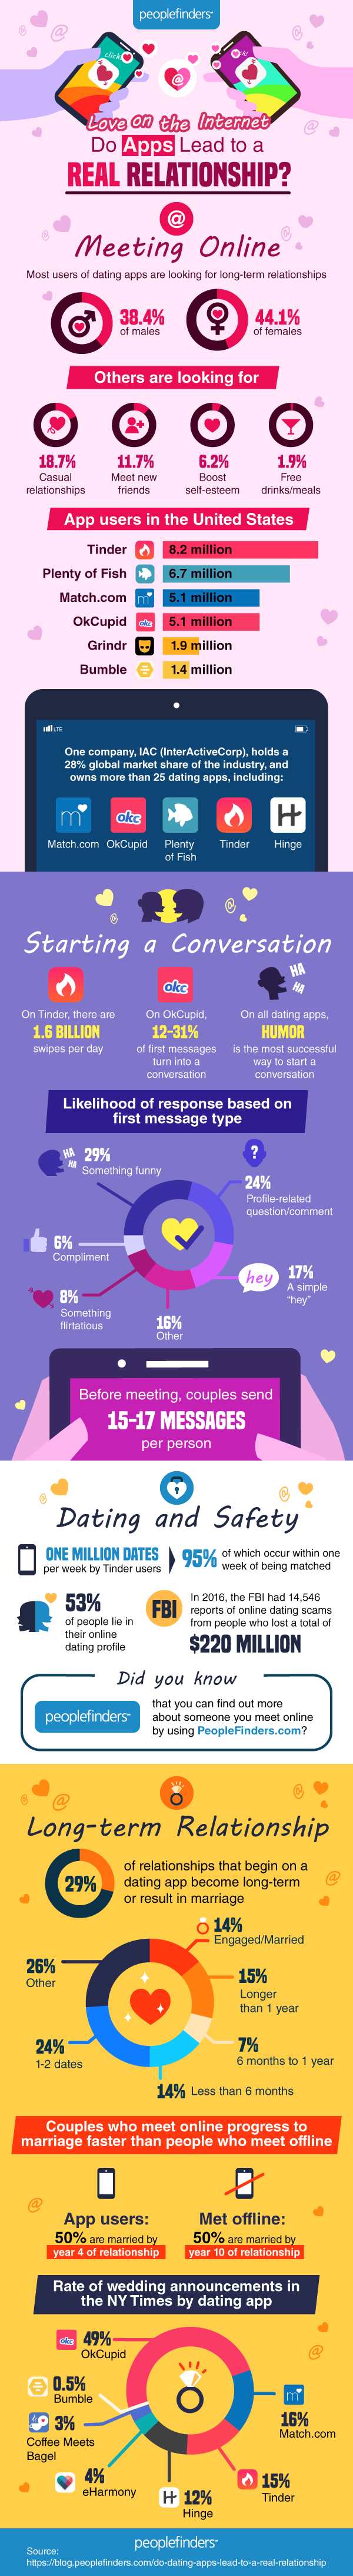 Love on the Internet: Do Dating Apps Lead to a Real Relationship?